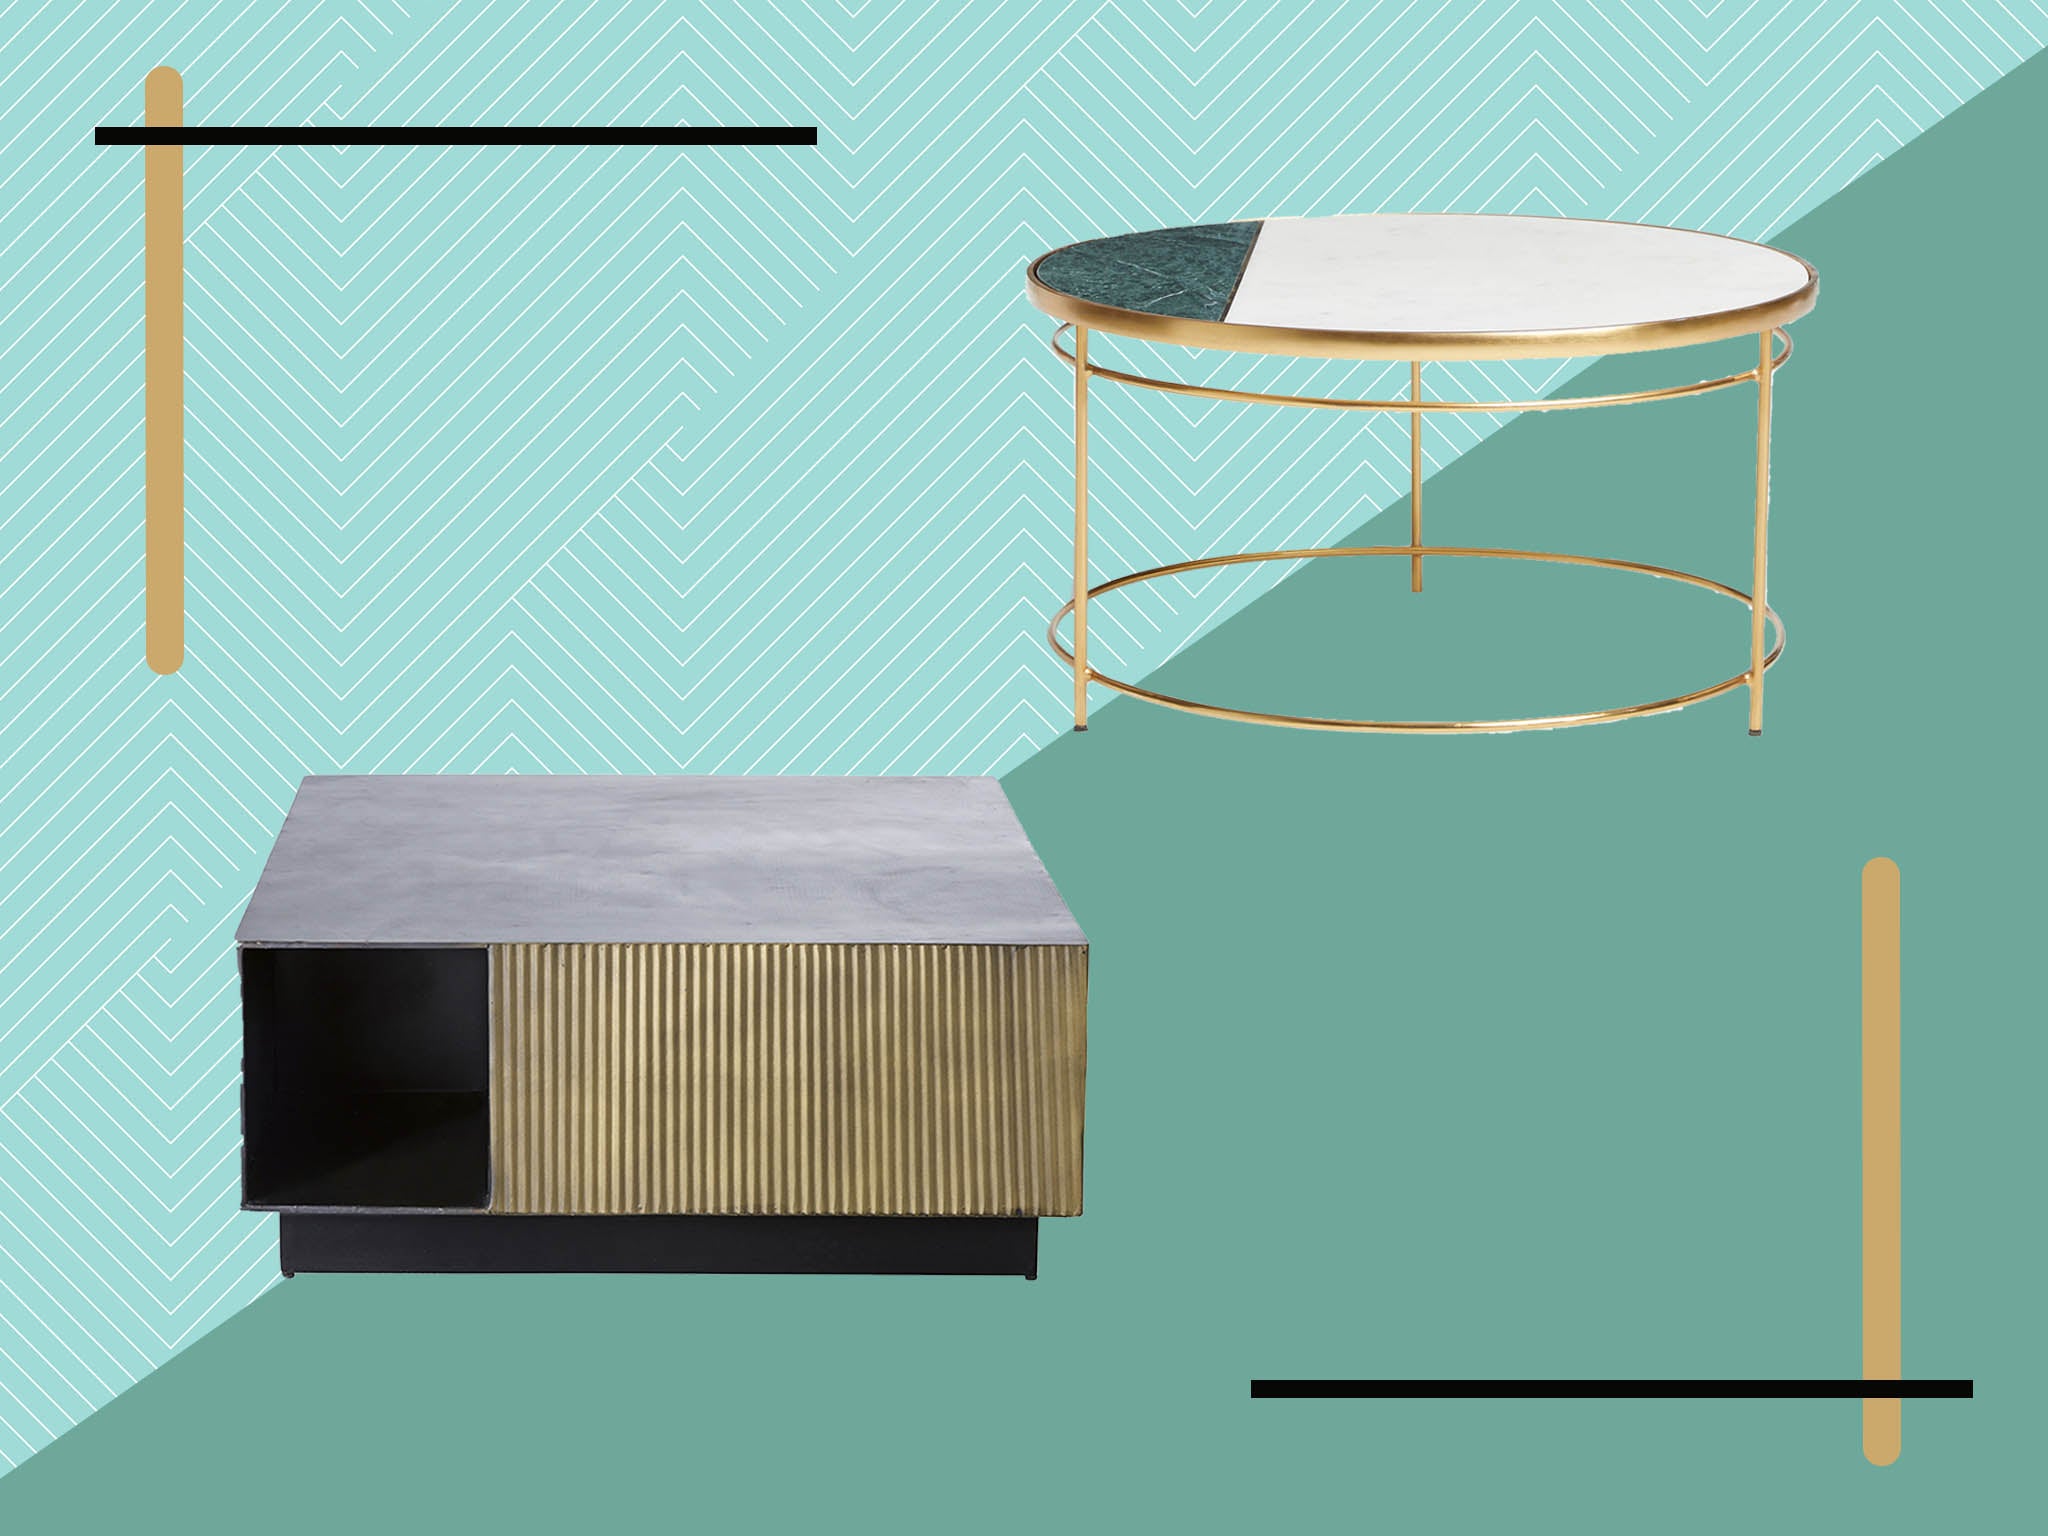 Our round-up includes designs from the mid-century inspired to the clean-lined and contemporary